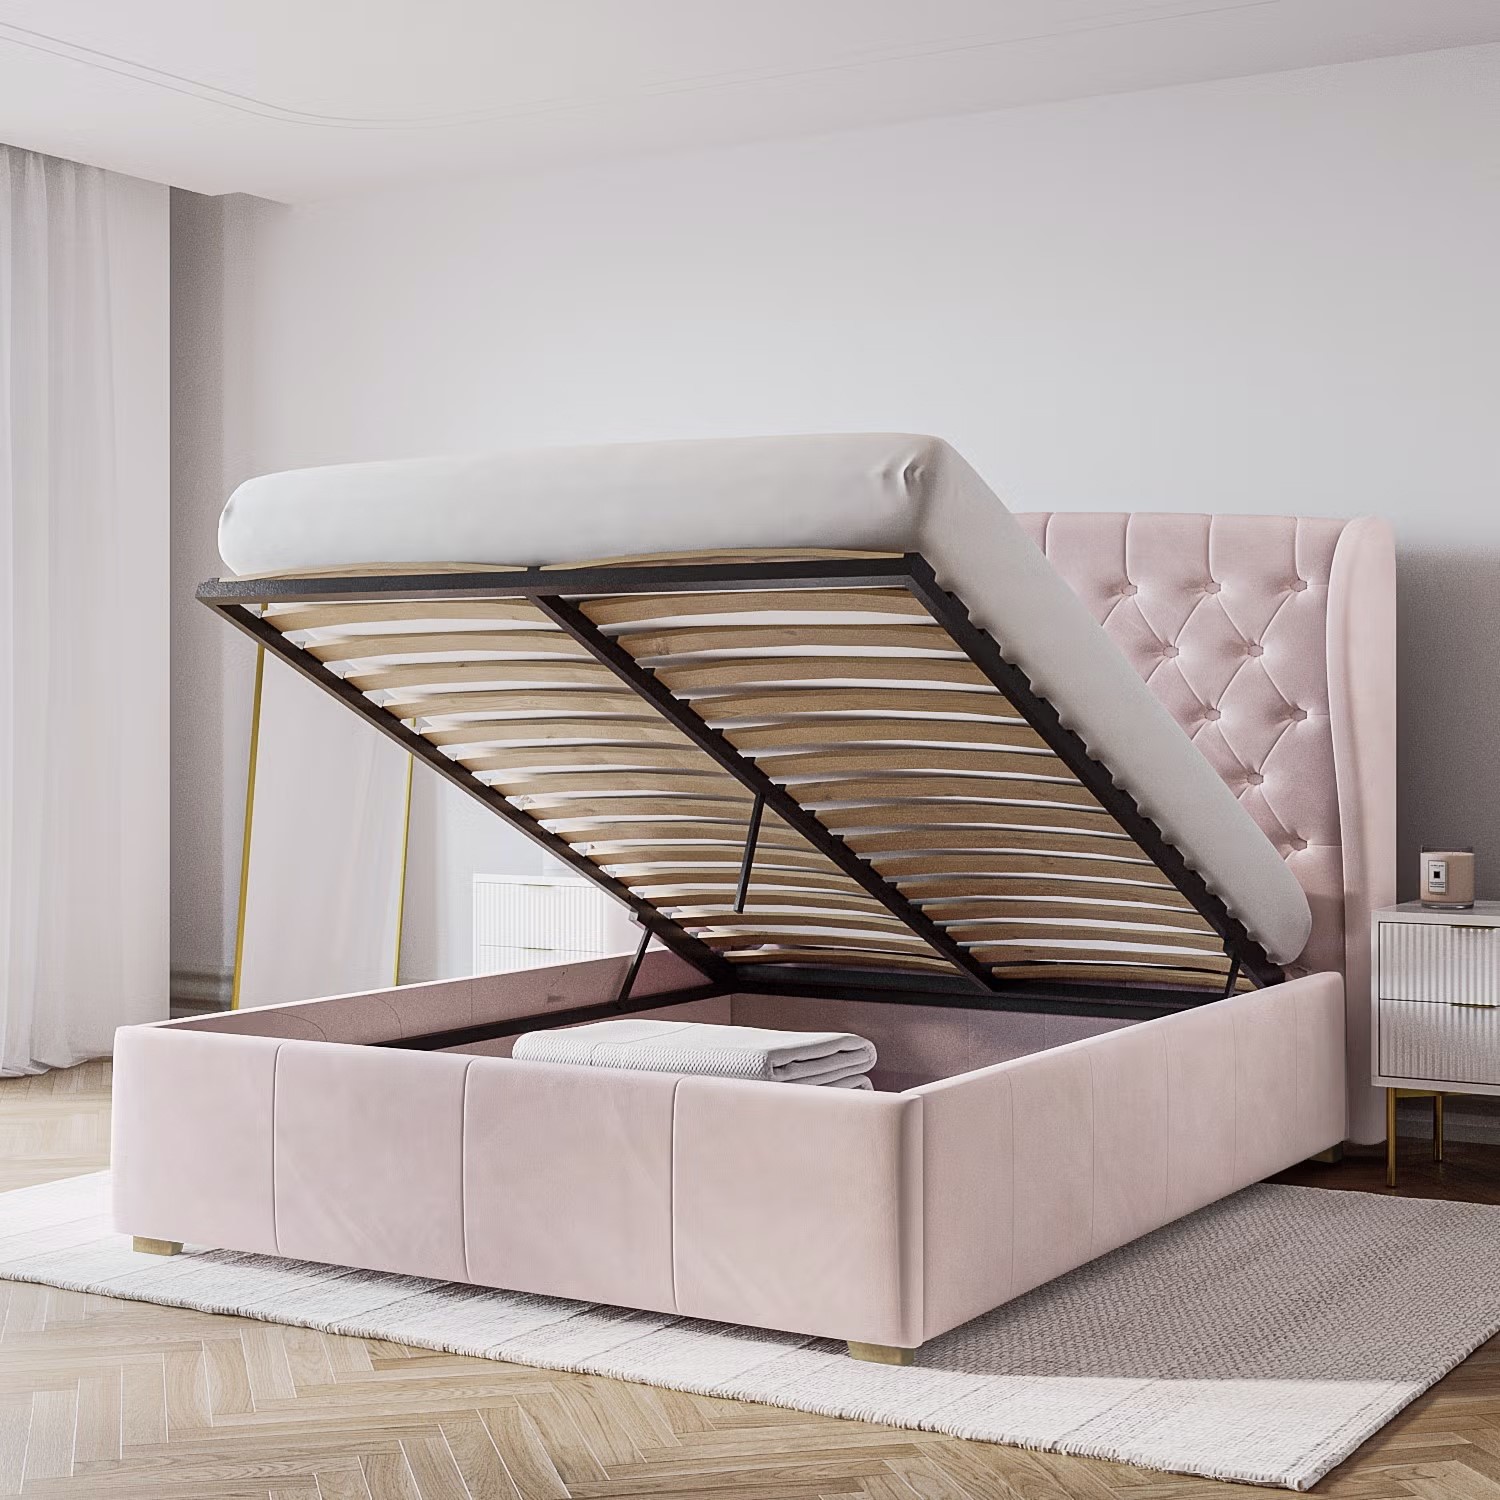 Blush Pink Velvet King Size Ottoman Bed With Chesterfield Headboard Safina Furniture123 